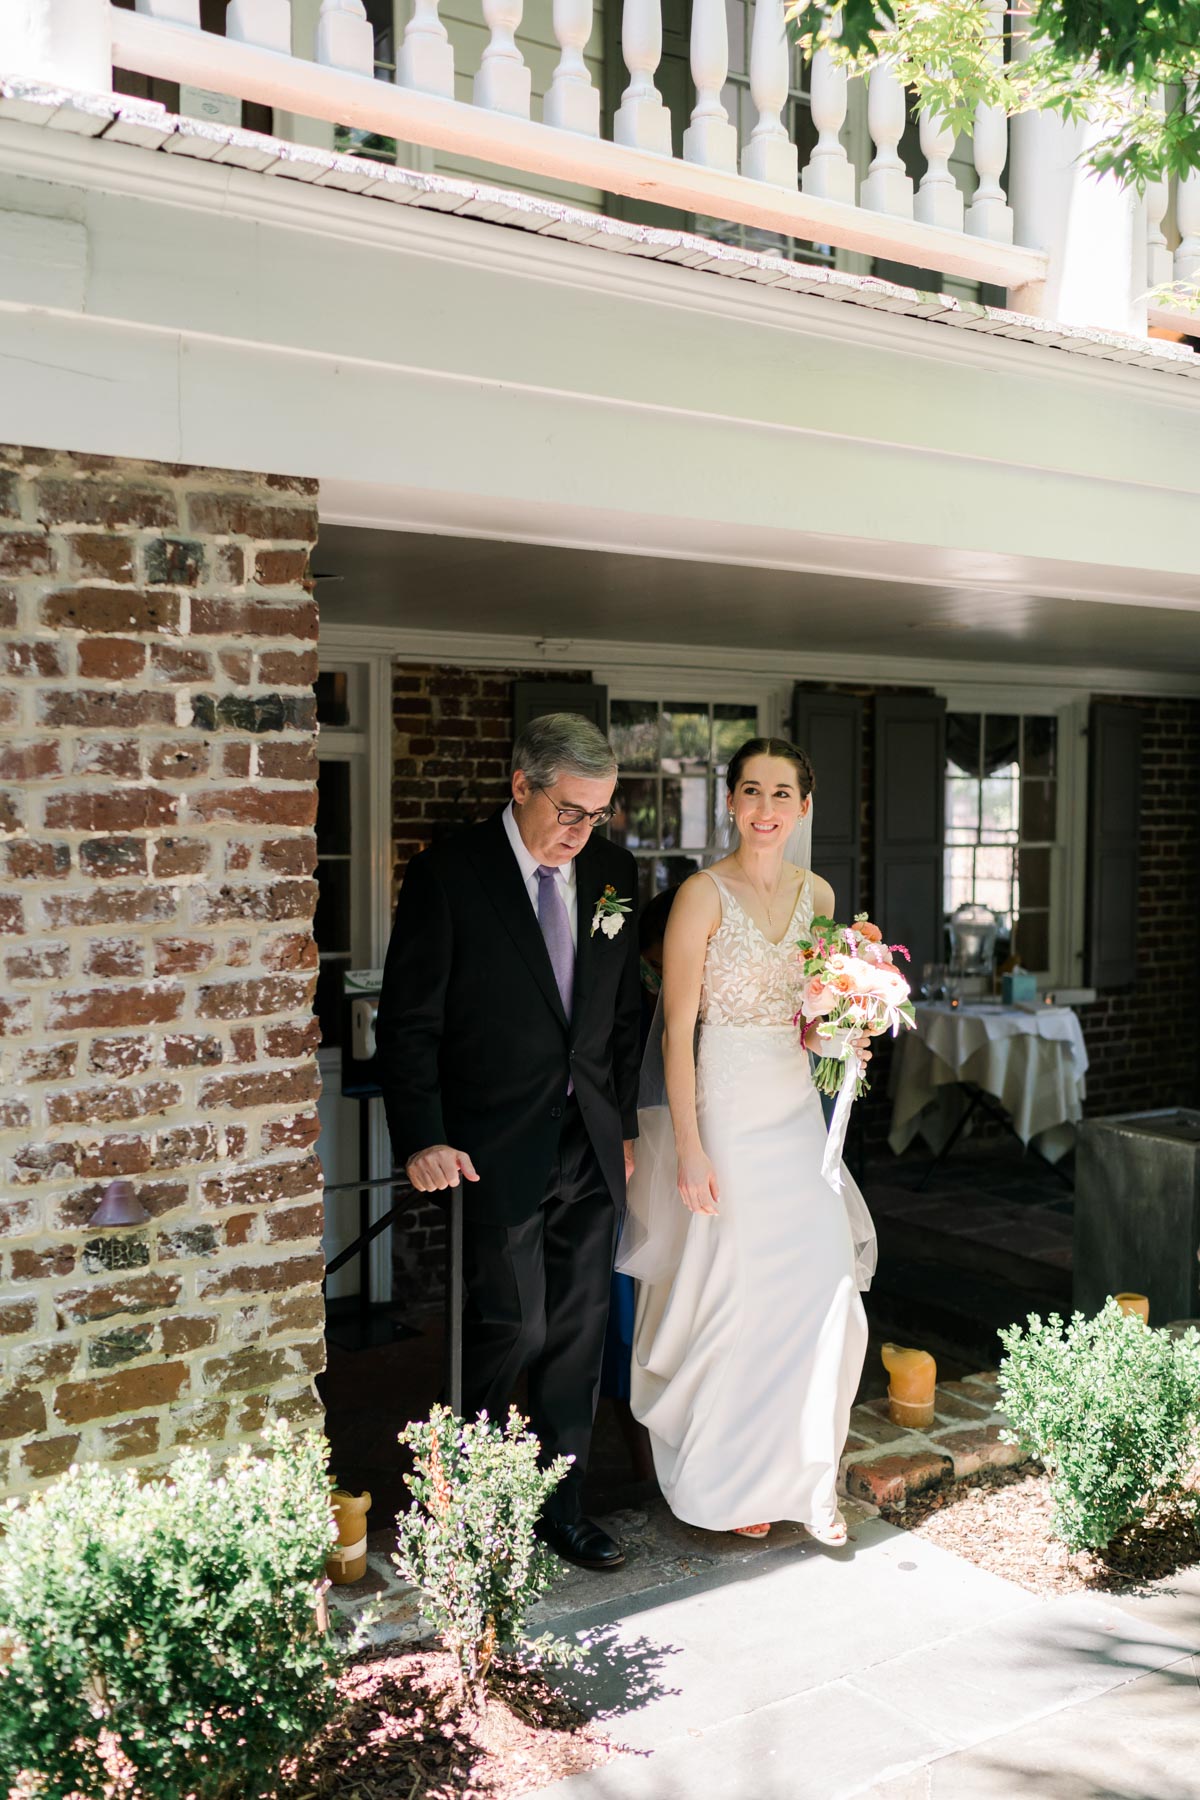 A bride and her father preparing to walk down the aisle